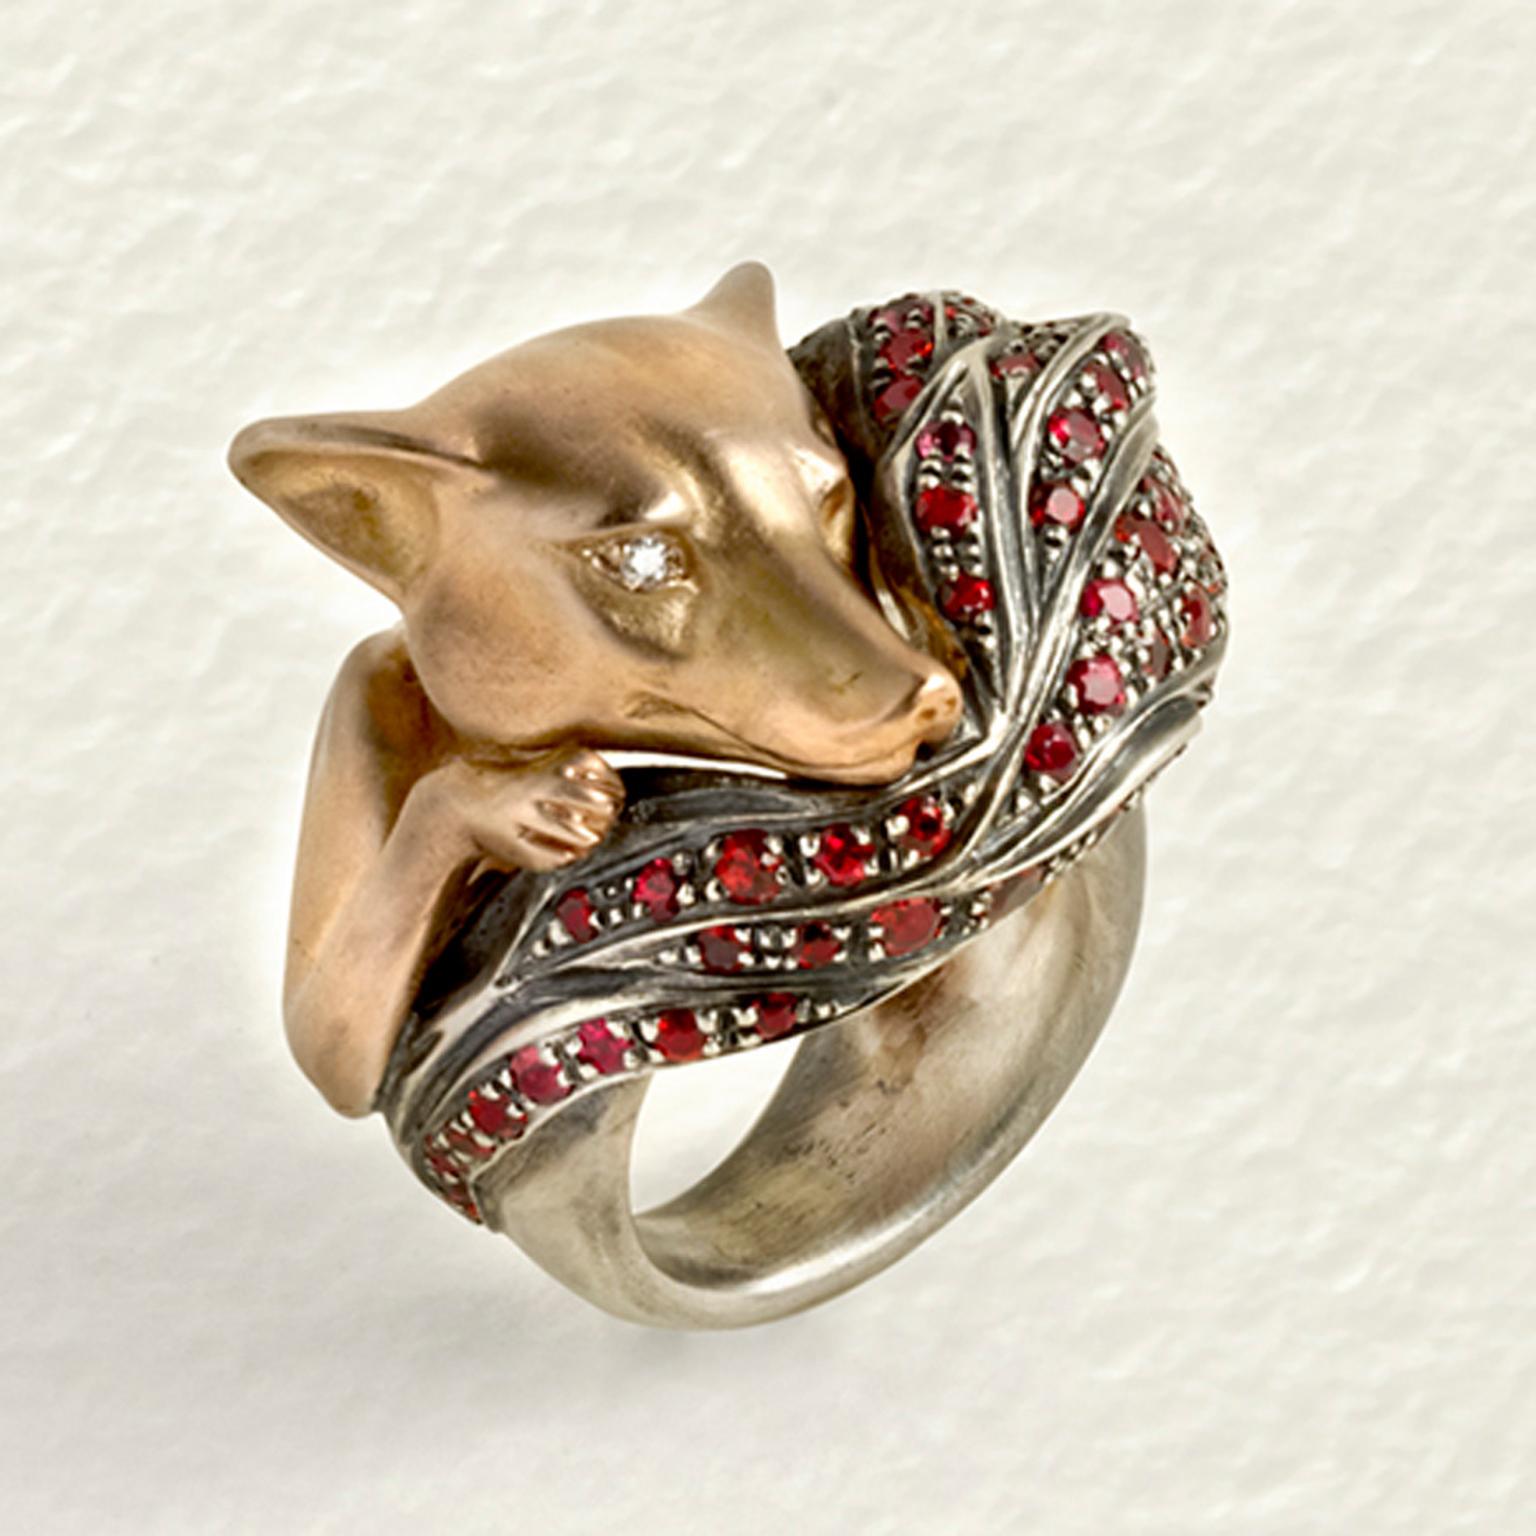 The animal kingdom has acted as a potent muse to jewellers for centuries